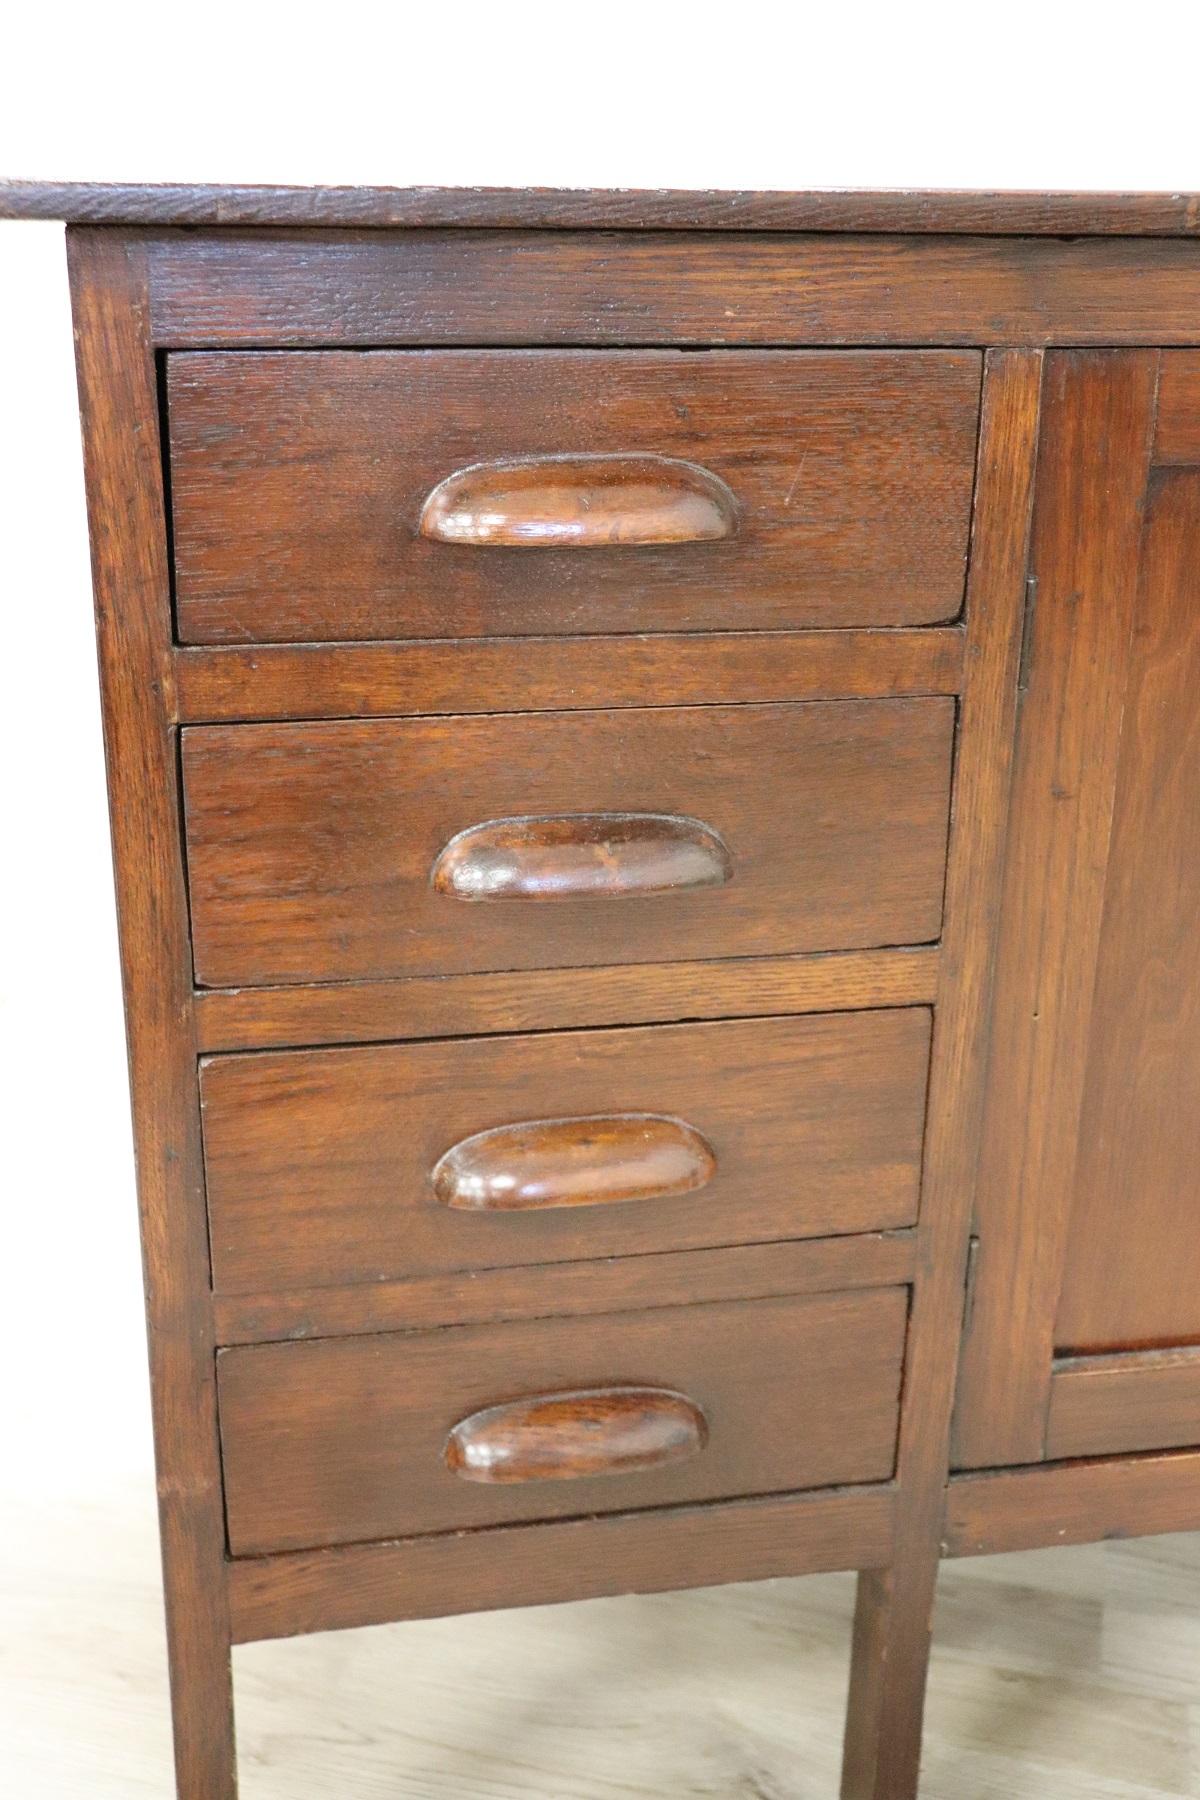 Rare Italian Art Deco buffet. Made of fine solid oakwood. All these features are typical of the 1930s Art Deco period. Small size can also be used in small rooms. Four comfortable drawers and two doors. Perfect conditions ready to be inserted in